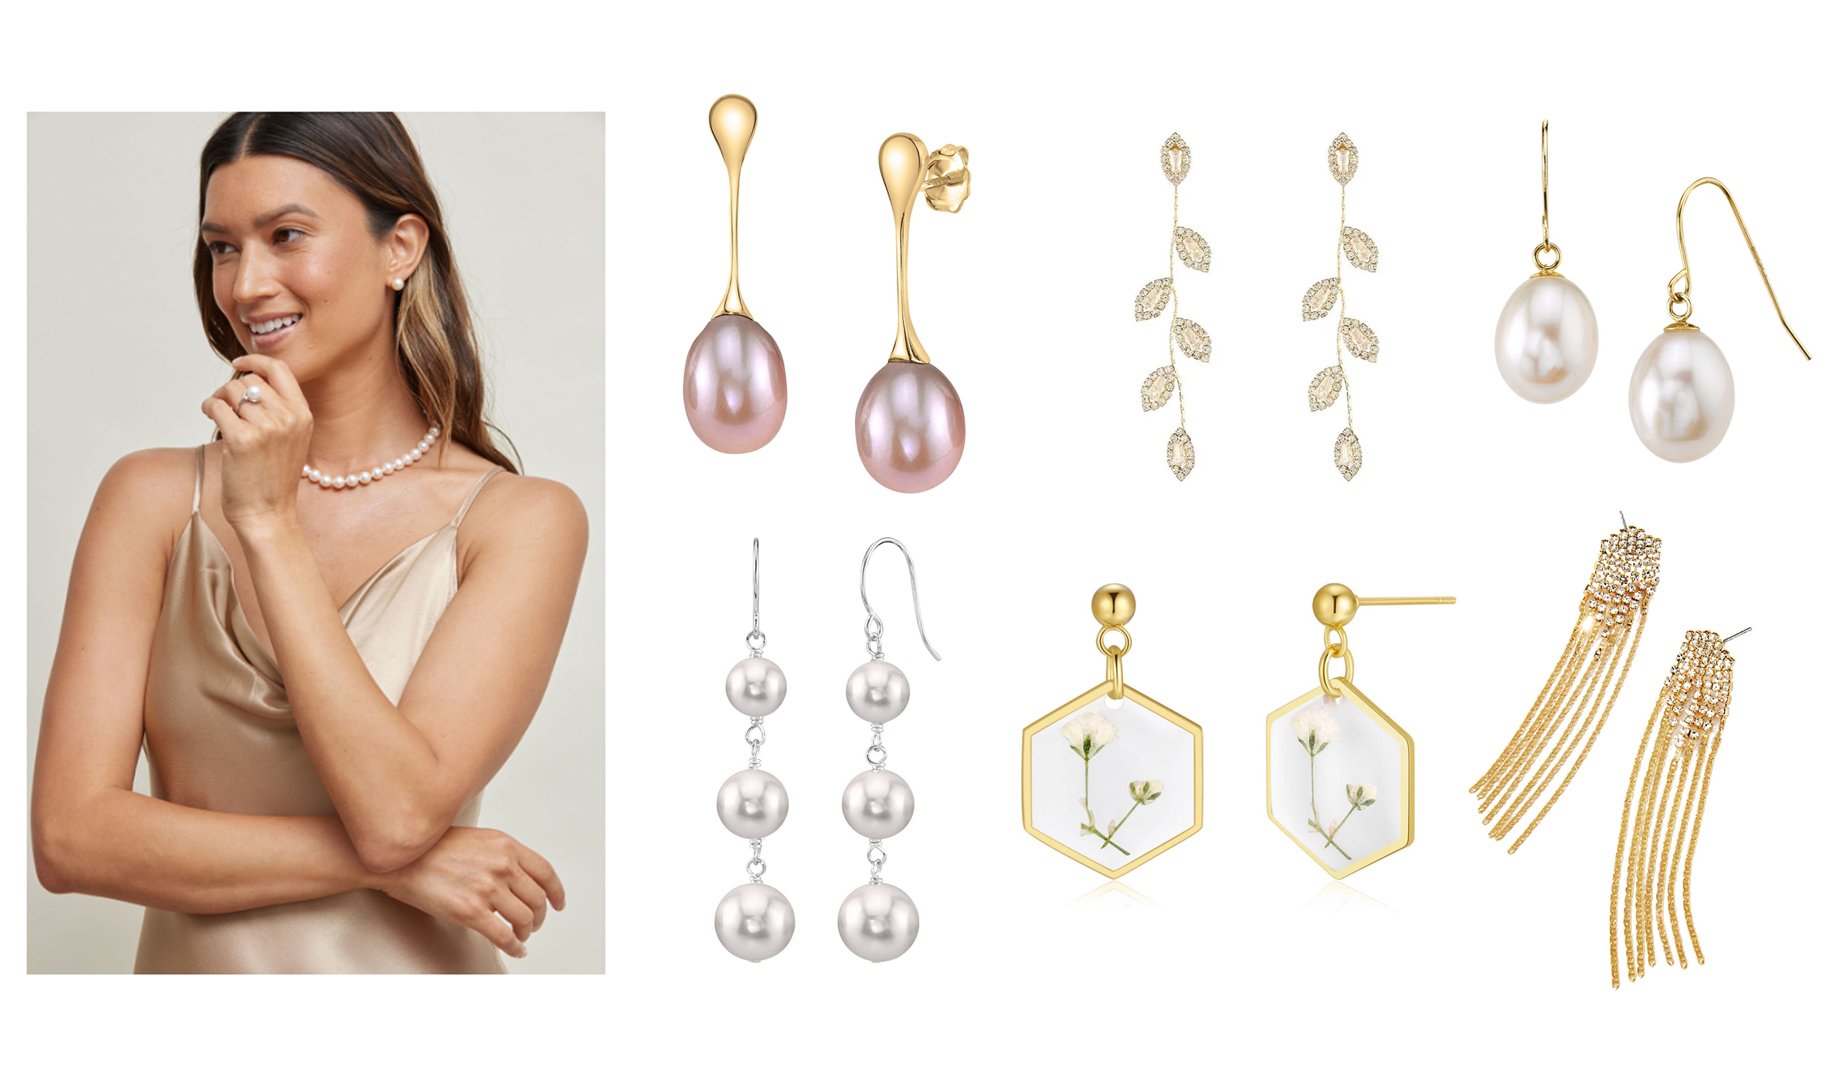 Color Blossom Long Earrings, Pink Gold, White Mother-Of-Pearl And Diamonds  - Jewelry - Categories